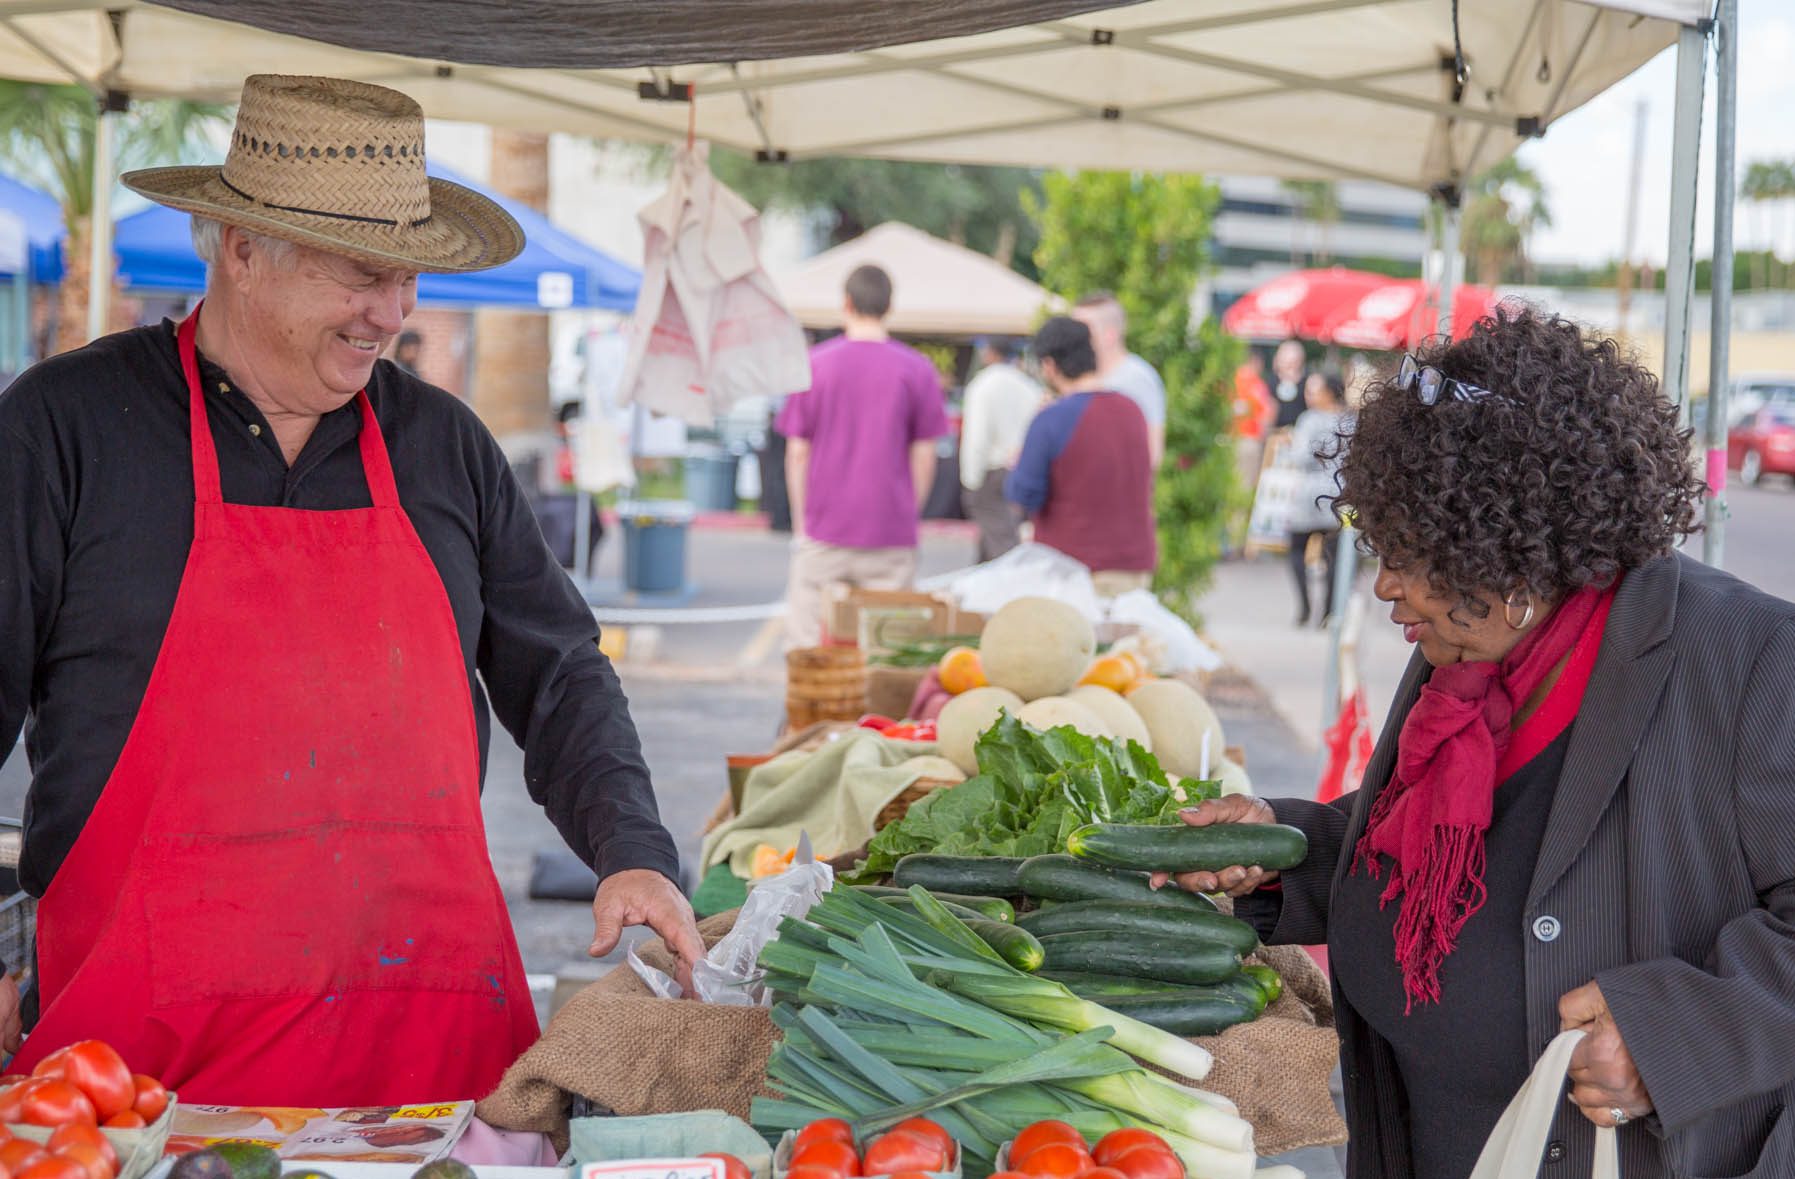 U-Haul Farmers Market Promotes Health and Sustainability in Midtown Phoenix